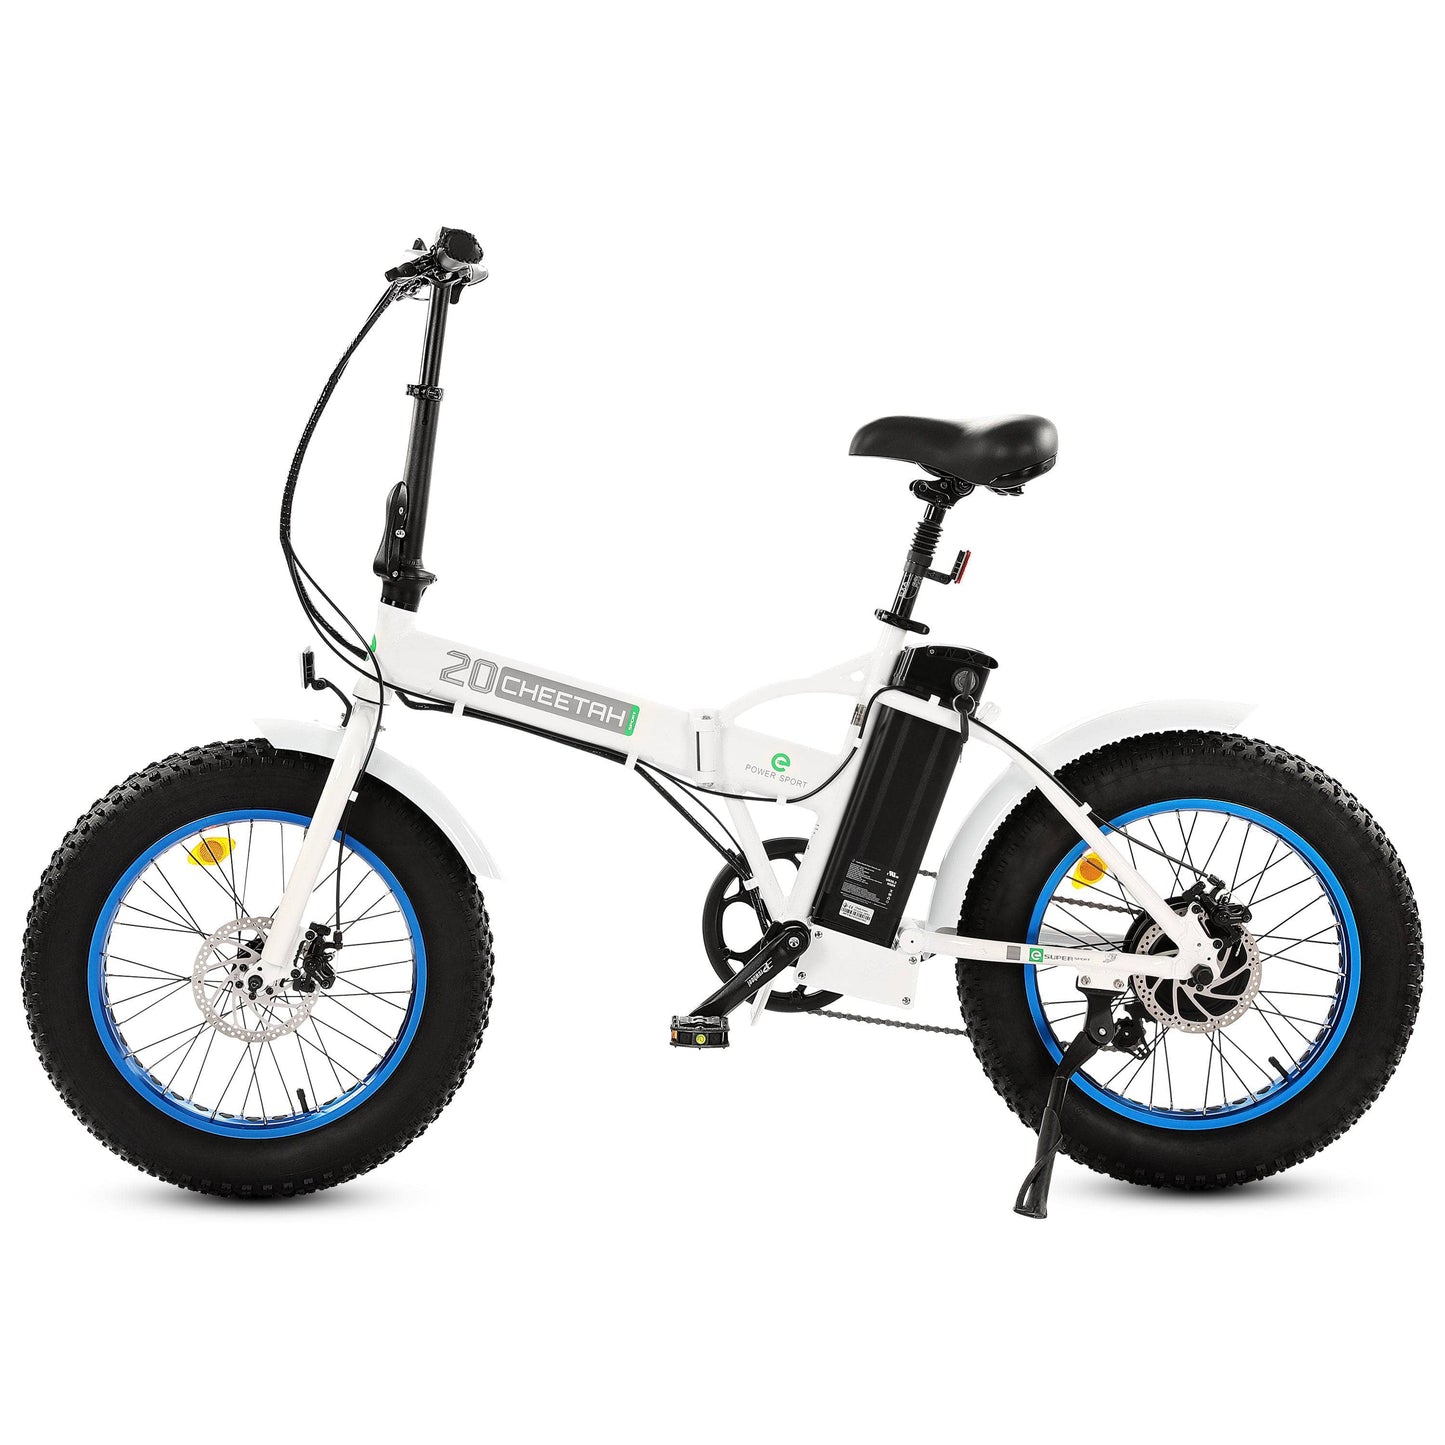 Ecotric Electric Bikes 20" / White Black (UL Certified) Ecotric 20" 36V 500W Fat Tire Folding Electric Bike